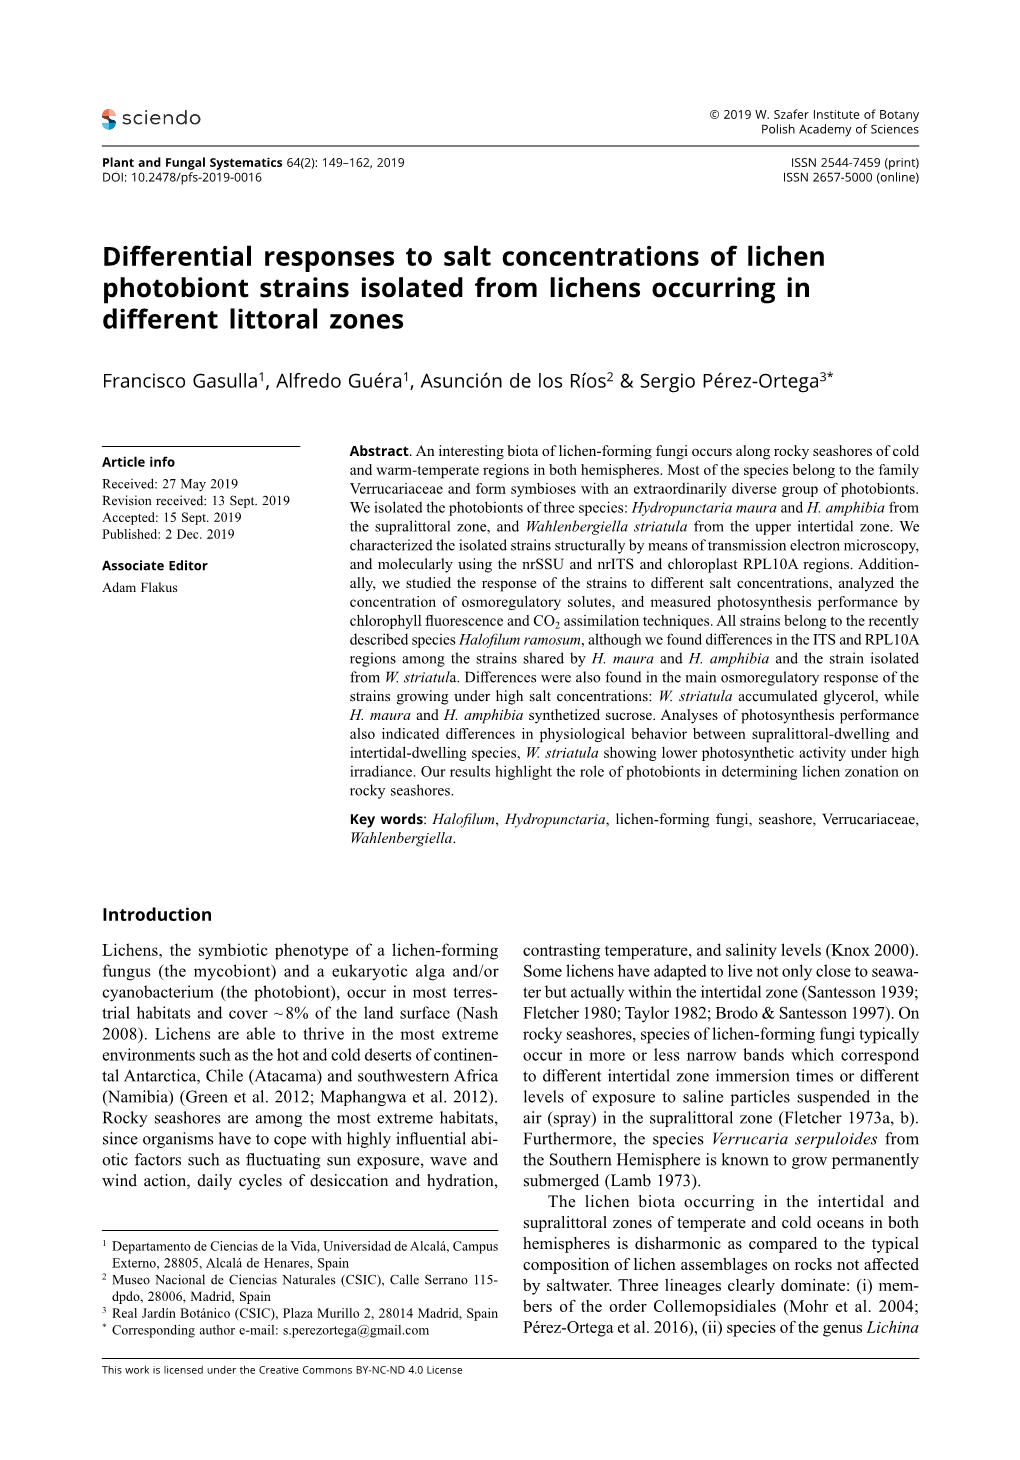 Differential Responses to Salt Concentrations of Lichen Photobiont Strains Isolated from Lichens Occurring in Different Littoral Zones